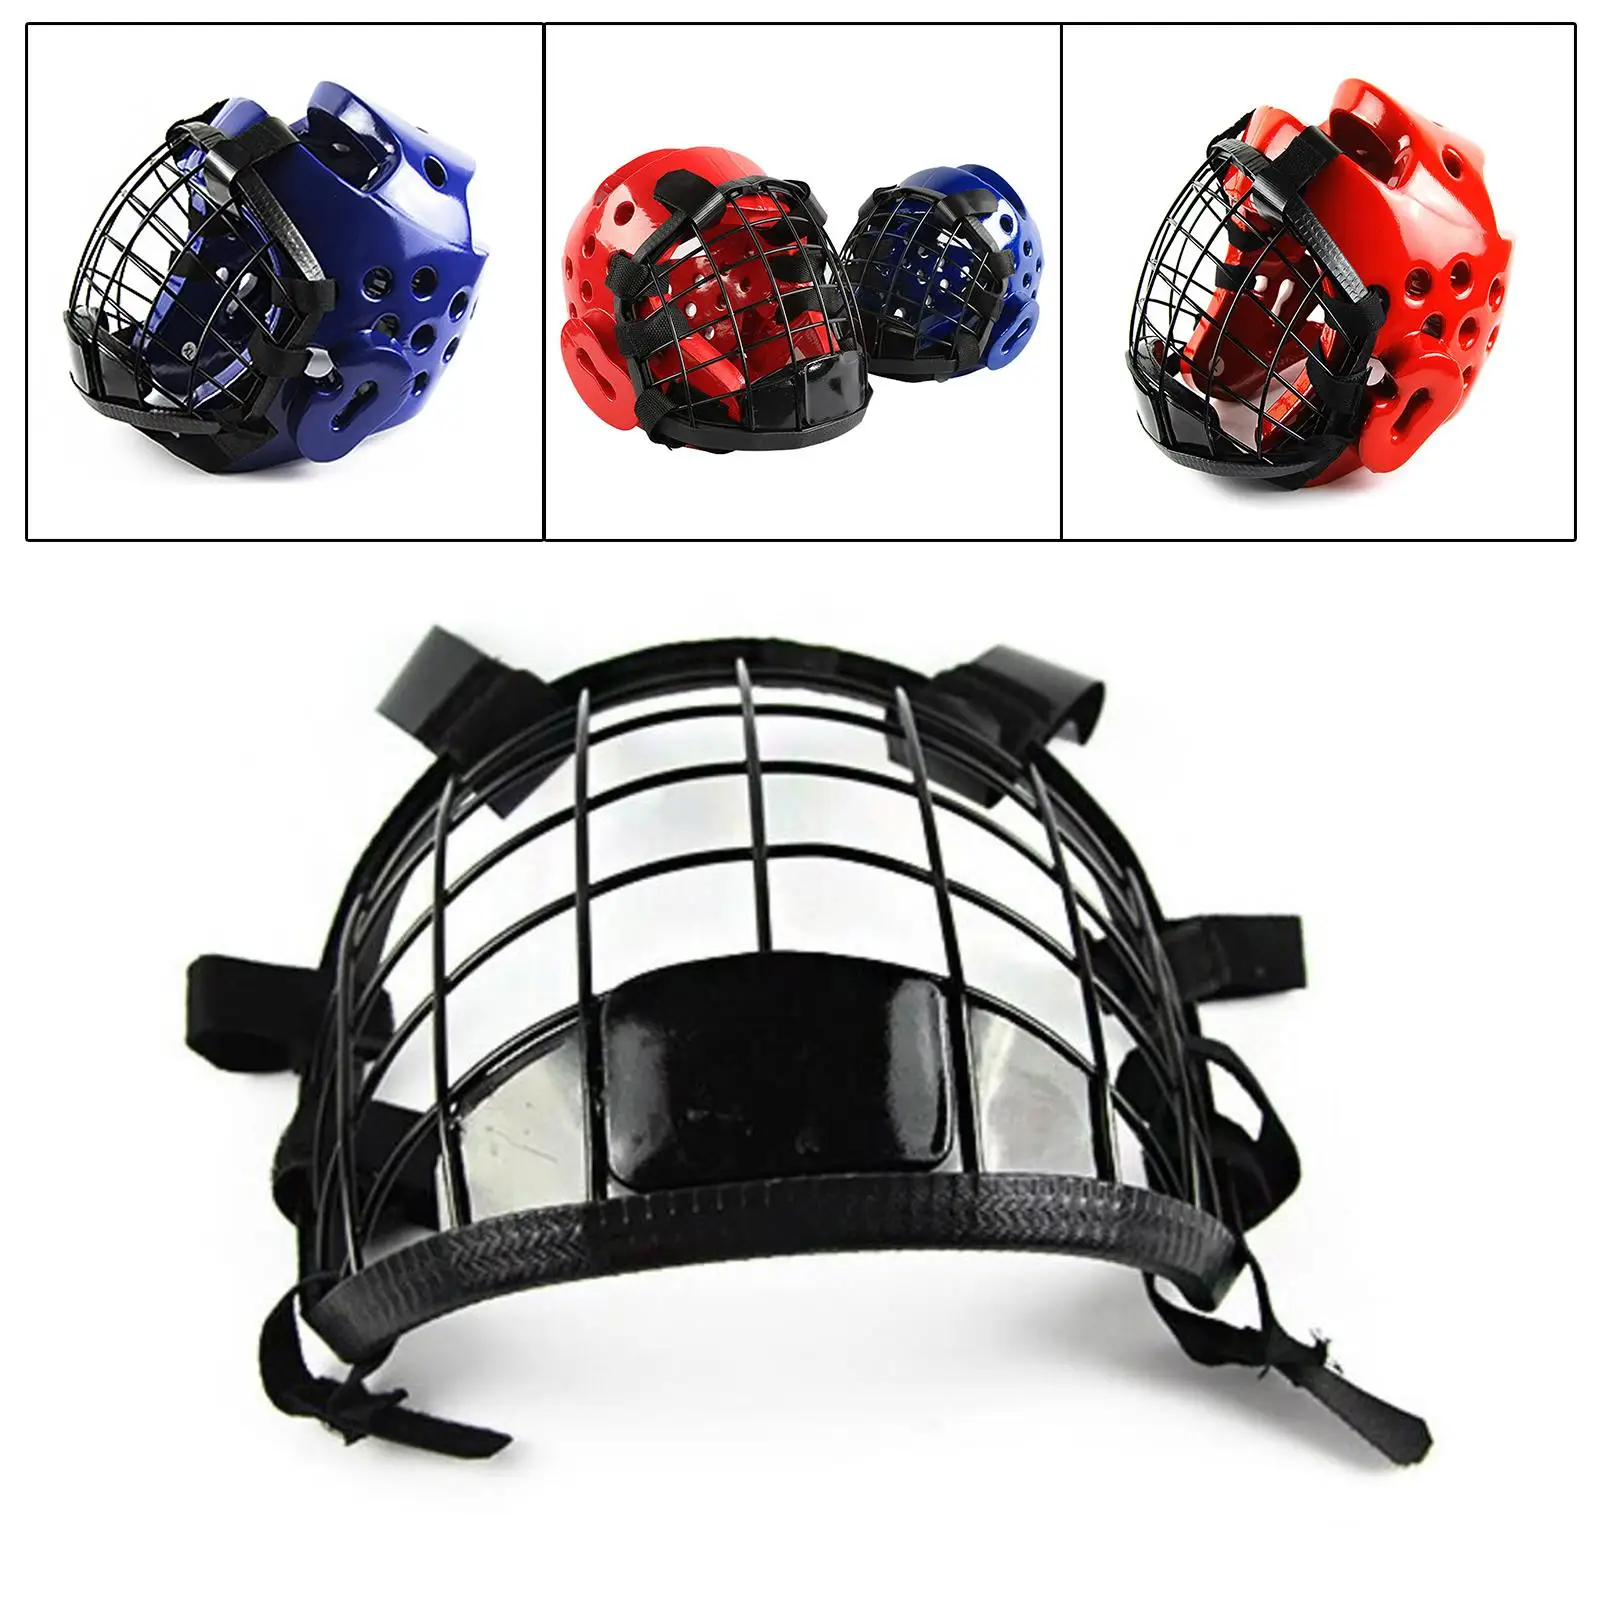 Metal Taekwondo guard Protection Protector Training Gear Face Guard for Boxing Sparring Kickboxing Grappling Muay Thai